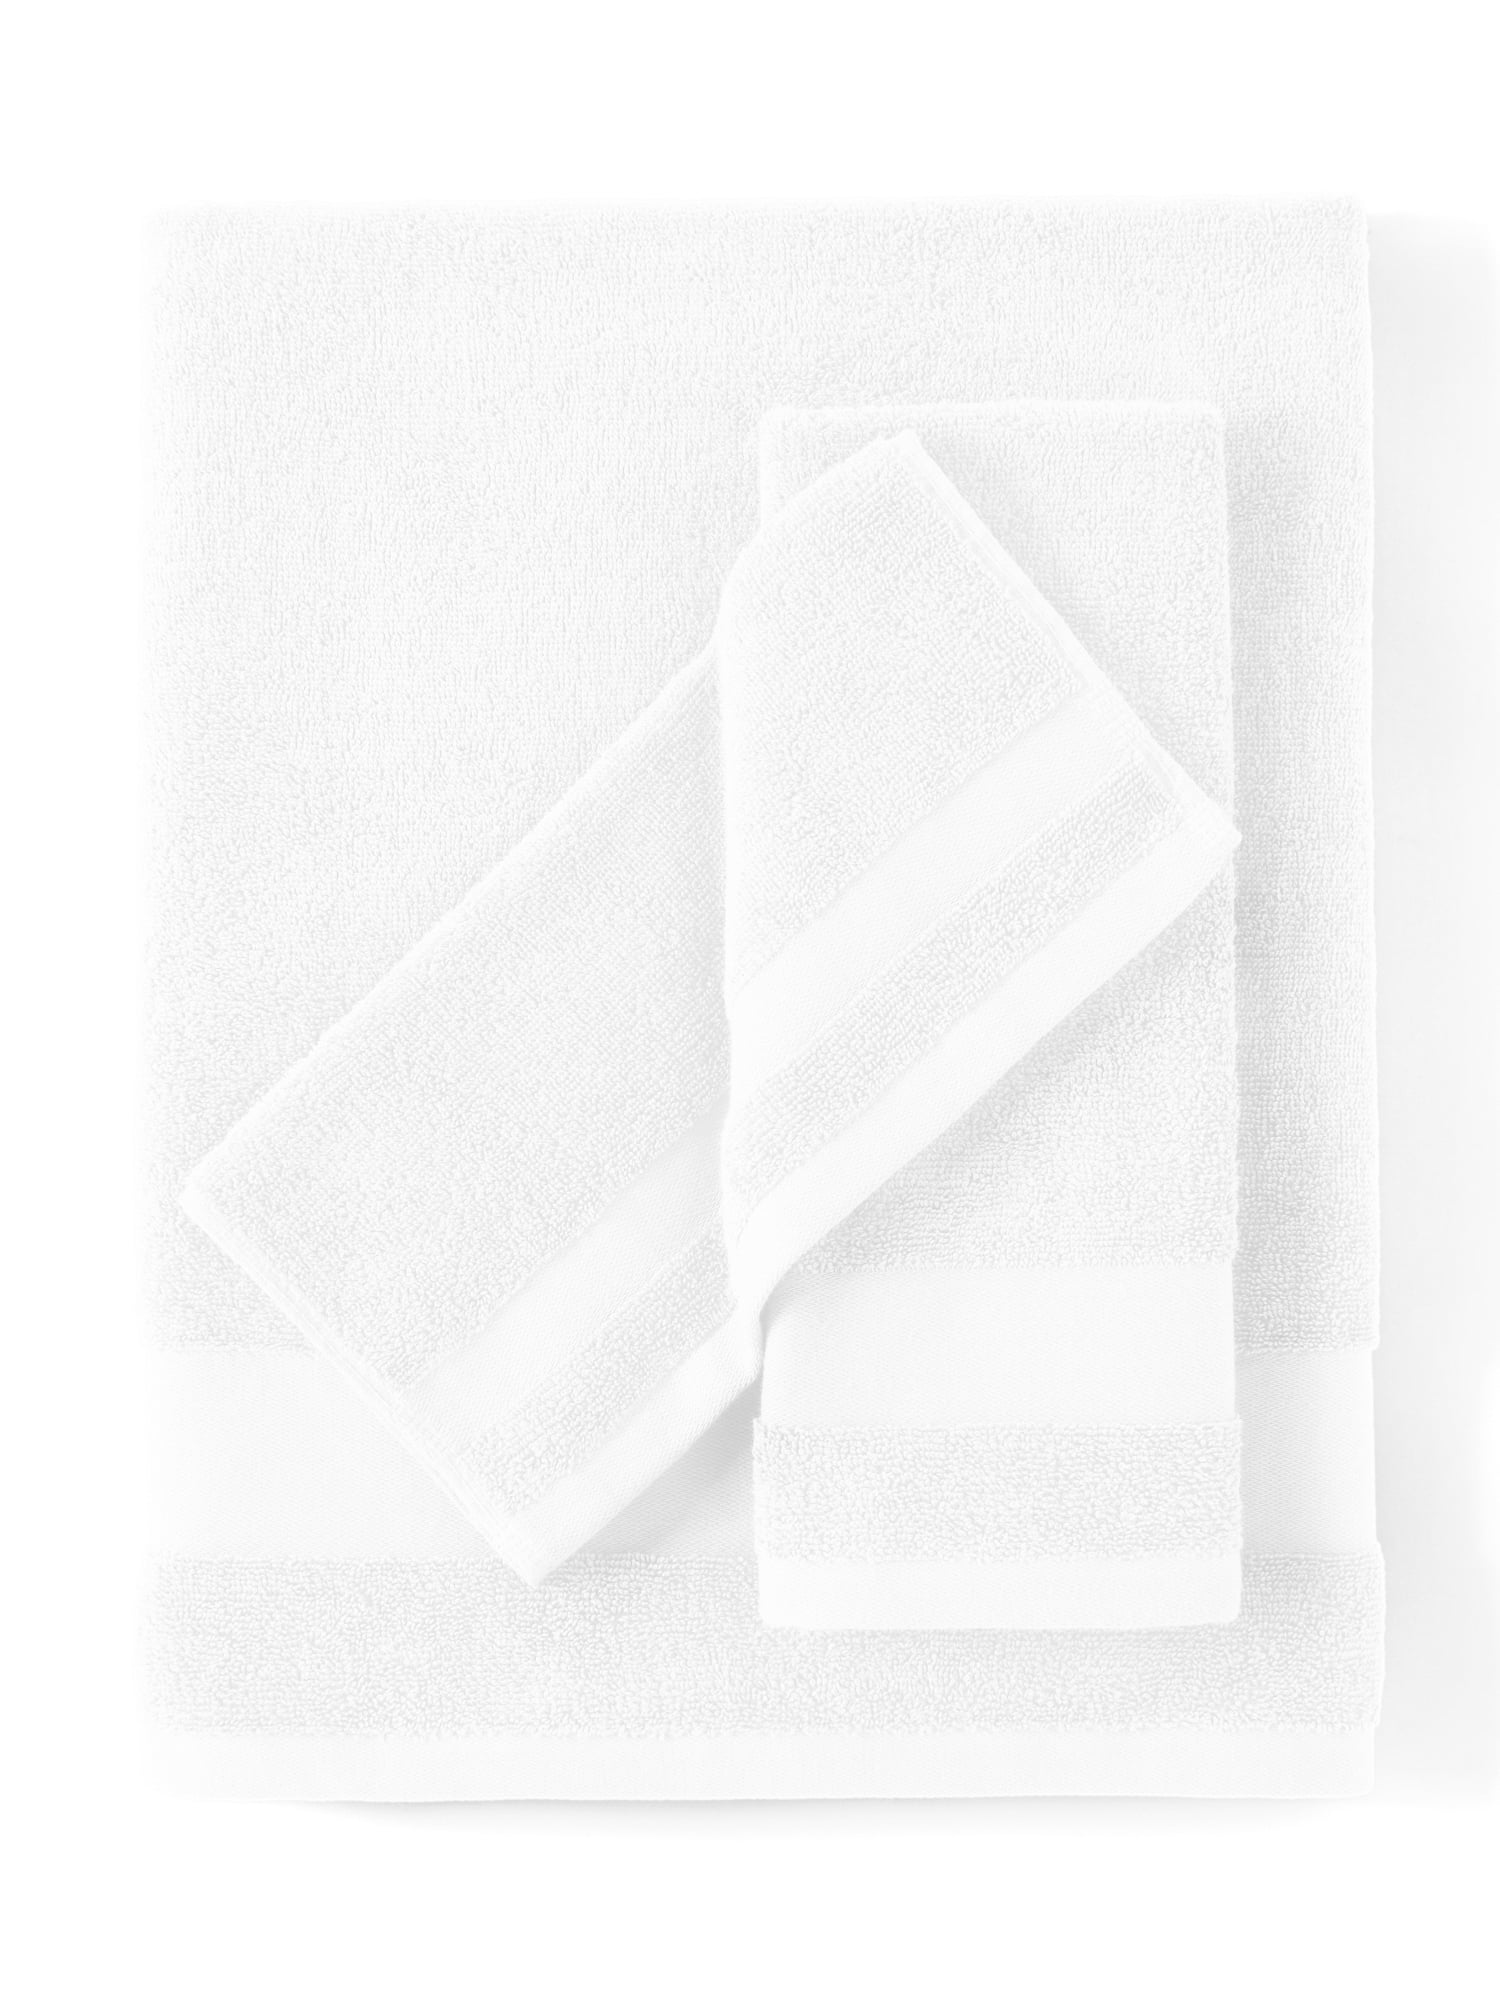 Comfort Canopy - White 4 Pack 100% Cotton Bathroom Essential Towels